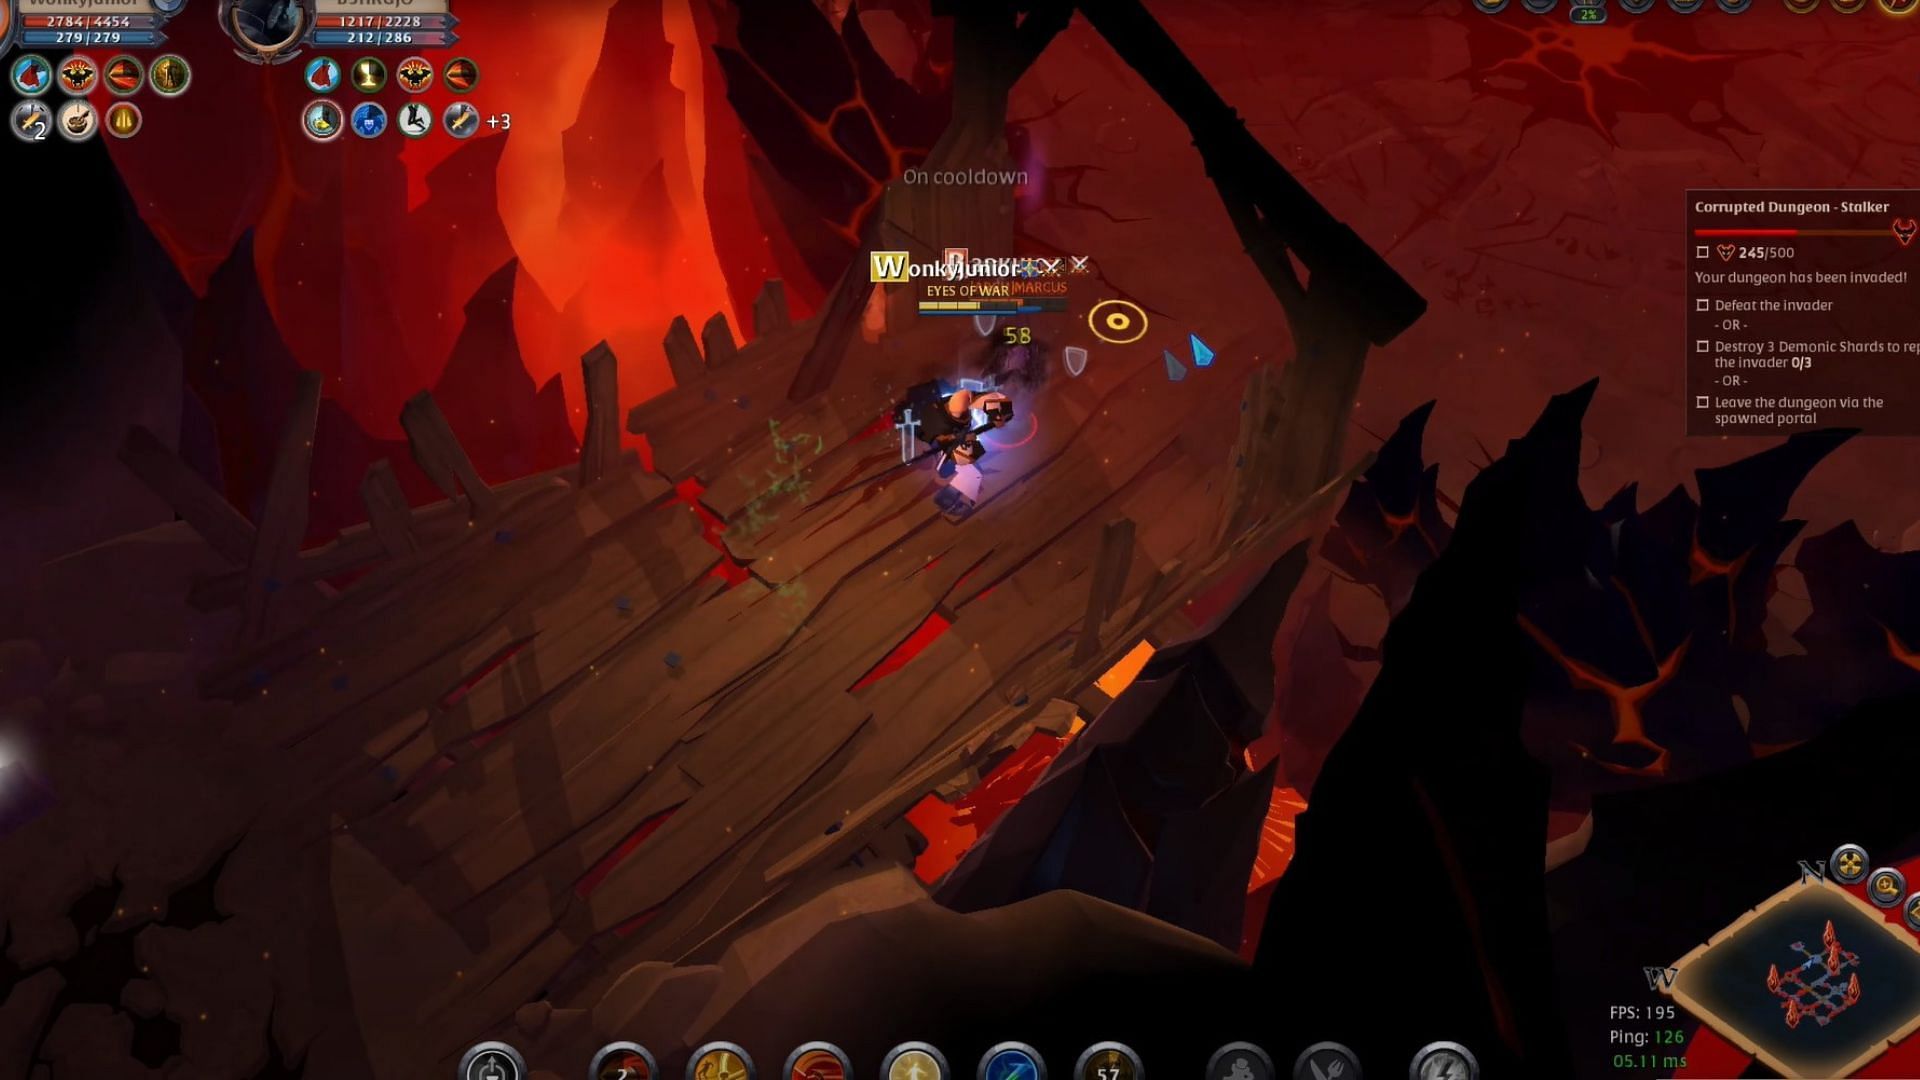 Best corrupted dungeon builds in Albion Online